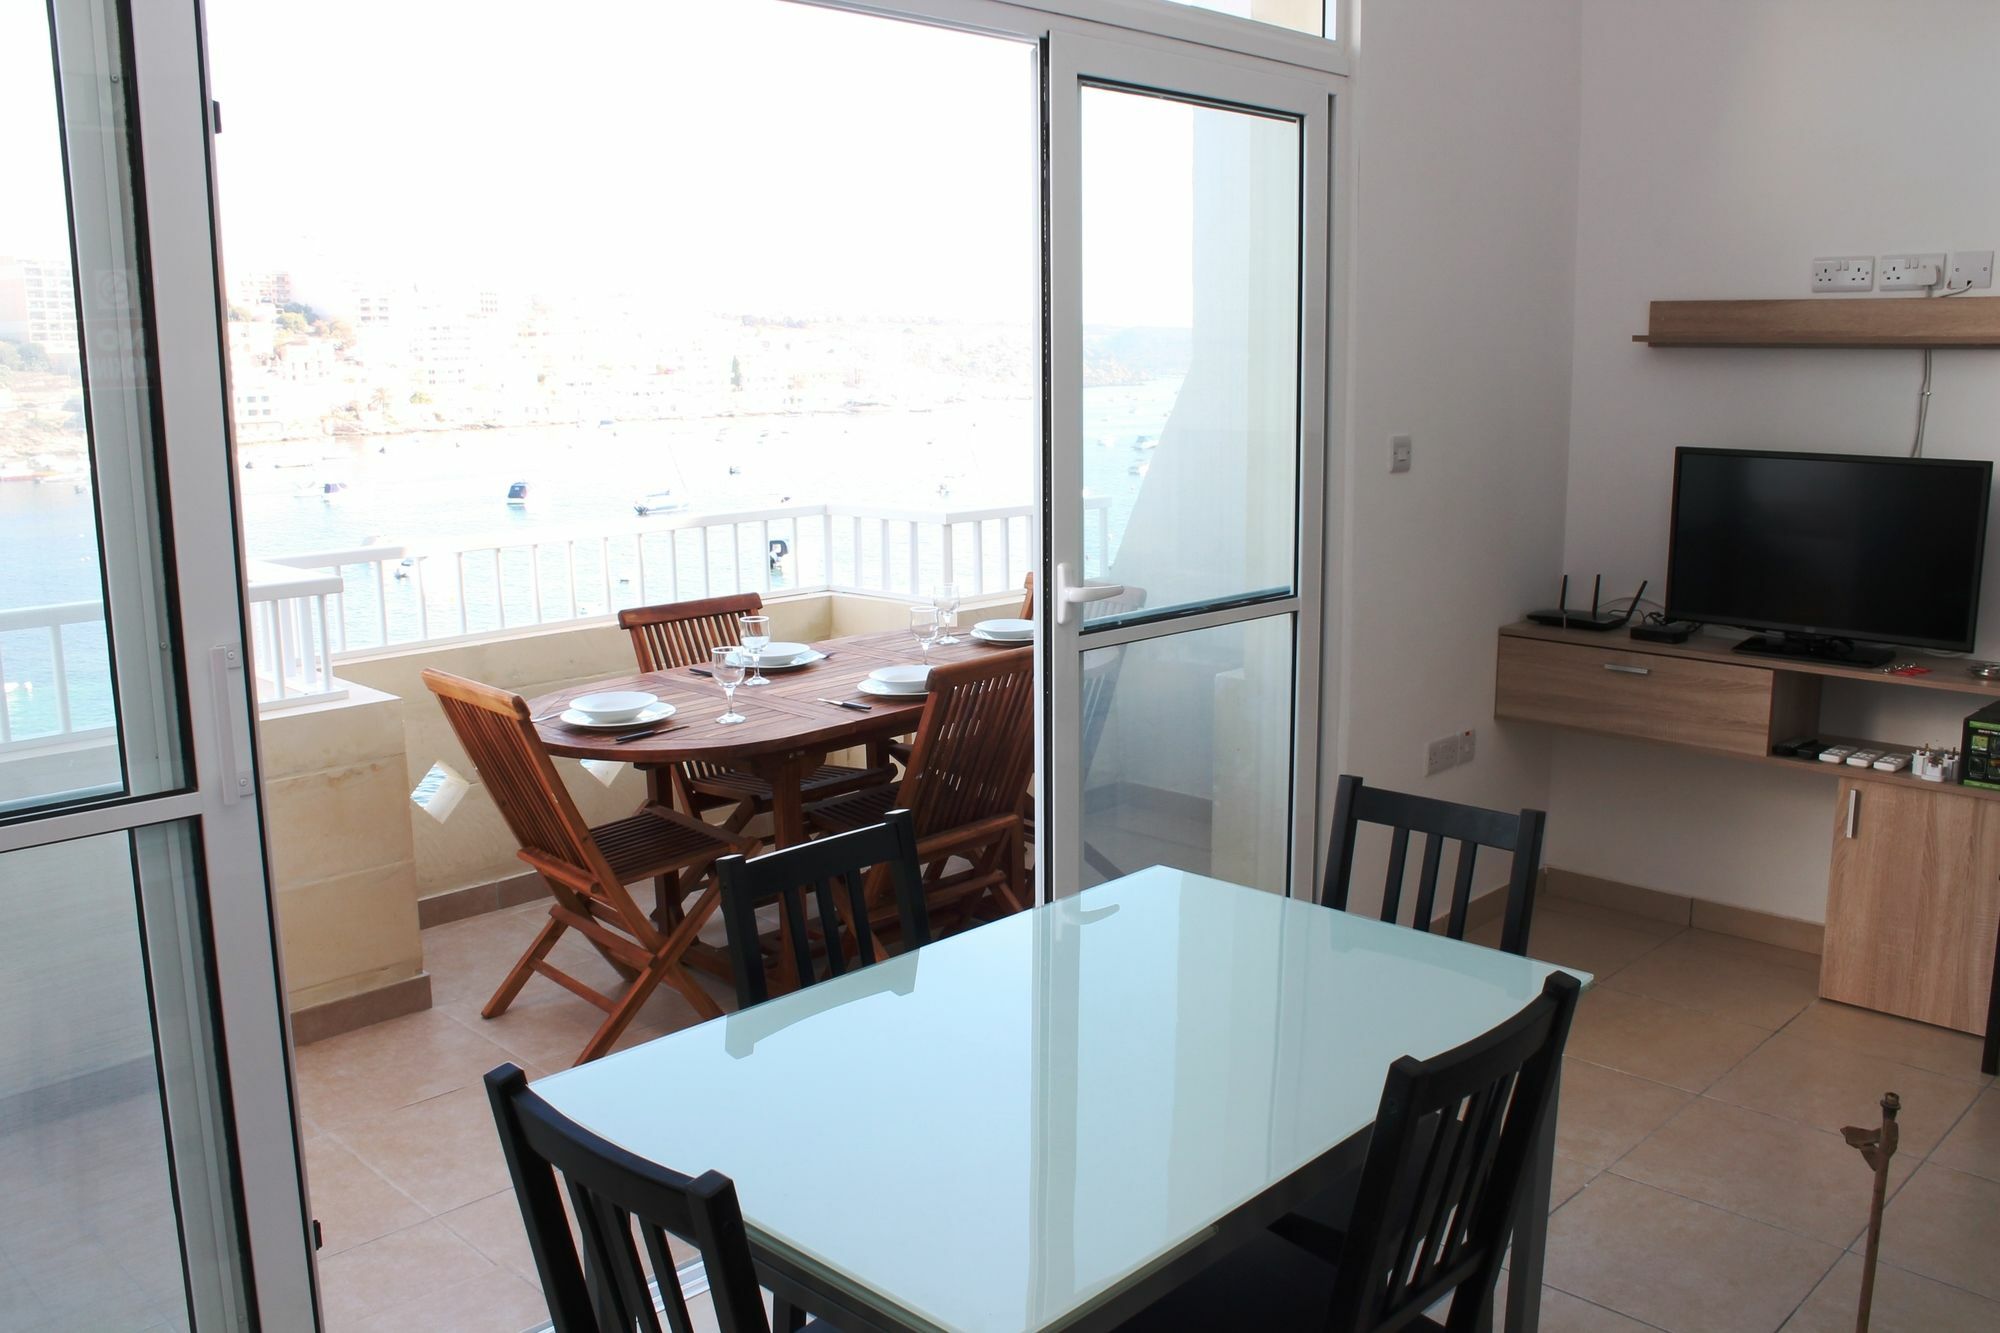 Blue Harbour Seafront 3 Bedroom Apartment, With Spectacular Sea Views From Terrace - By Getawaysmalta Σεντ Πόλς Μπέι Εξωτερικό φωτογραφία